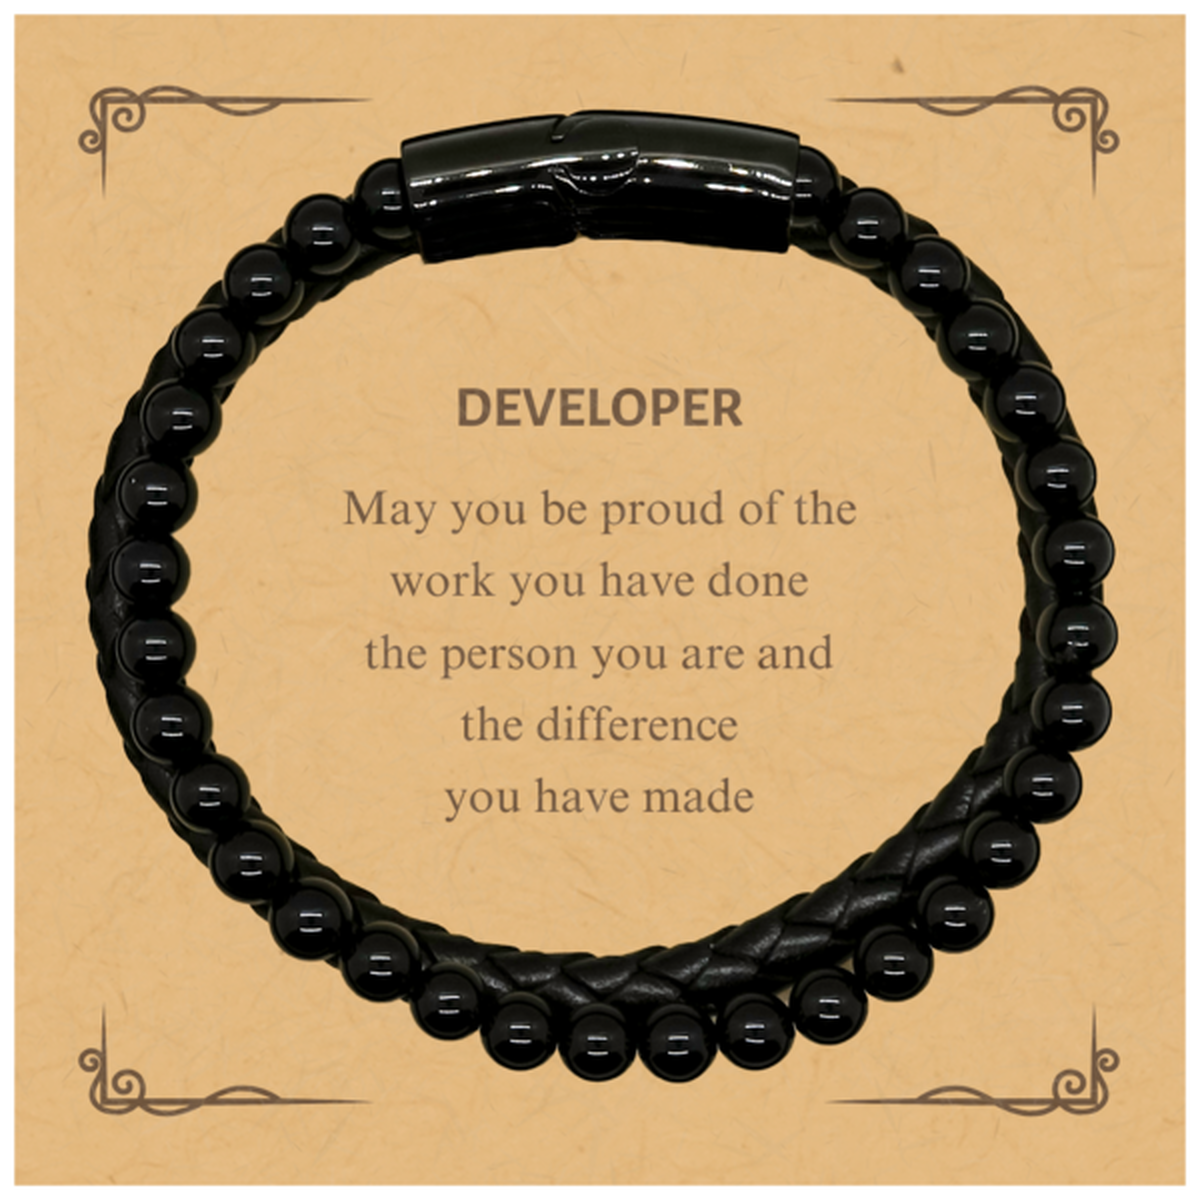 Developer May you be proud of the work you have done, Retirement Developer Stone Leather Bracelets for Colleague Appreciation Gifts Amazing for Developer